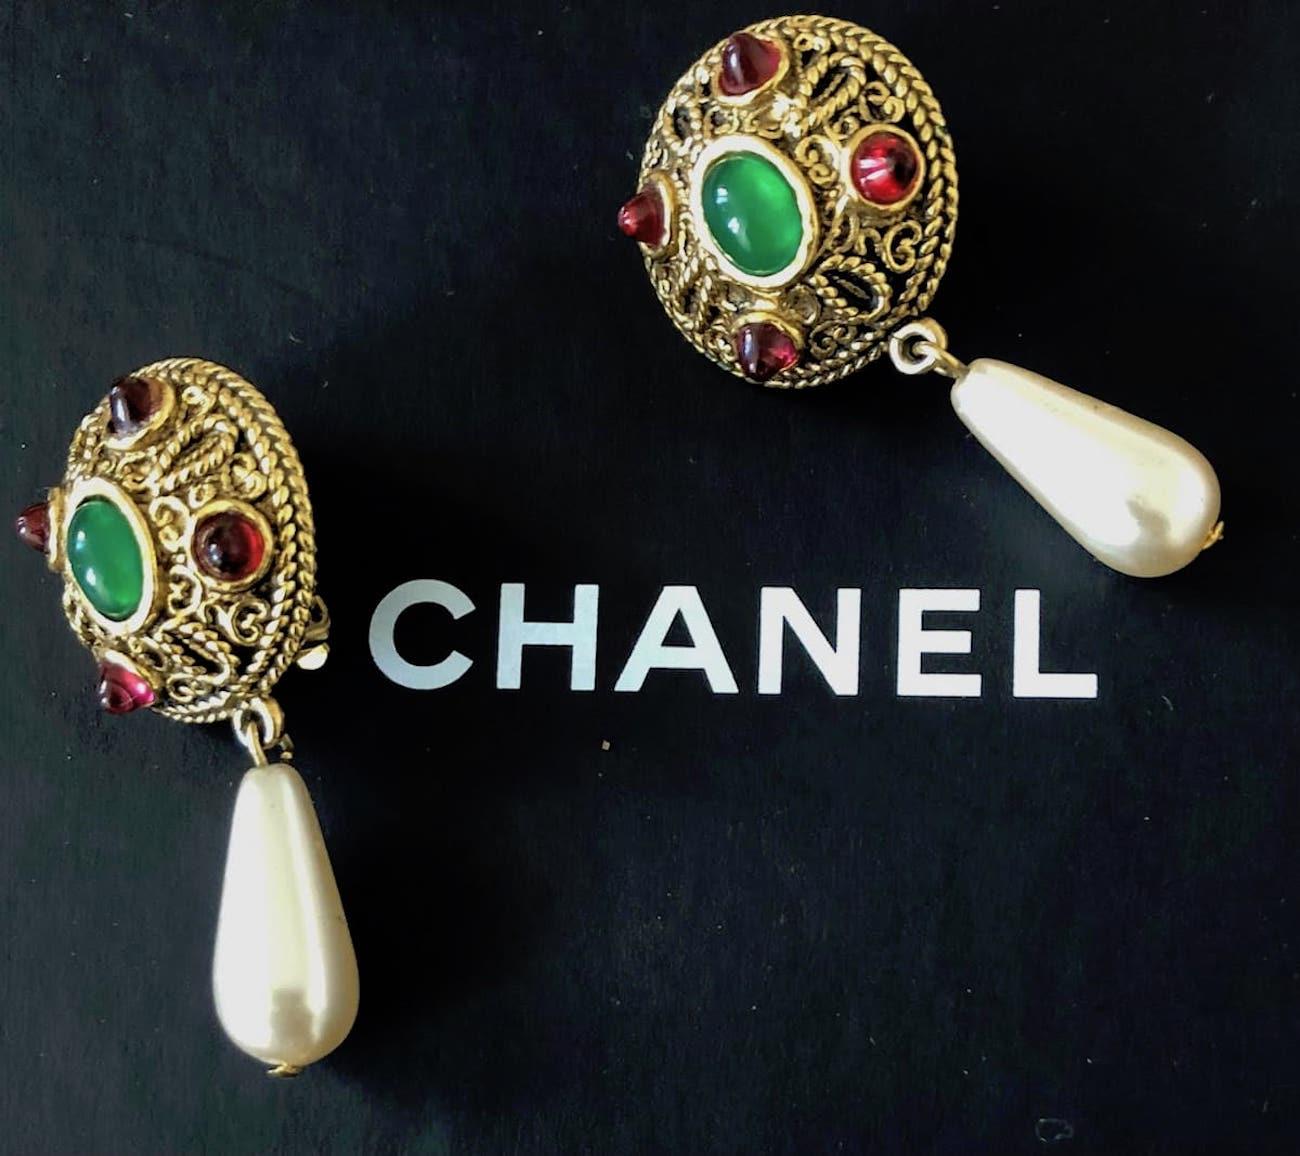 CHANEL Vintage Gold Metal Green and Pink Gripoix Pearl Drop Earrings 1980s W/Box
A timeless rare fabulous 1980s CHANEL pearl drop earrings in gold metal set with green and pink Gripoix poured glass. These Chanel maison Gripoix earrings are clip-on